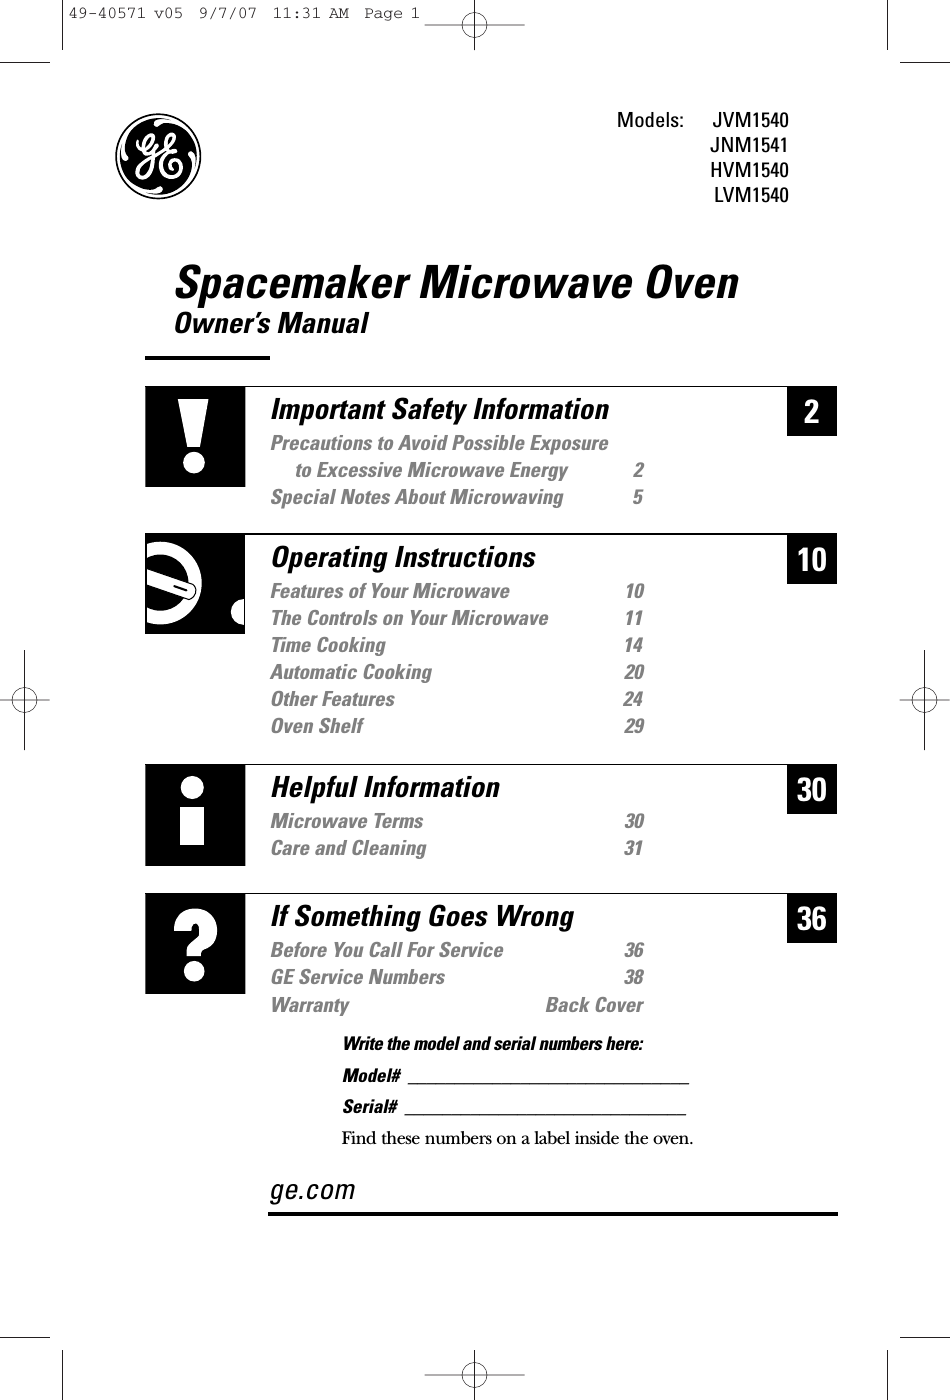 Spacemaker Microwave OvenOwner’s ManualModels: JVM1540JNM1541HVM1540LVM1540230Helpful InformationMicrowave Terms 30Care and Cleaning 3136If Something Goes WrongBefore You Call For Service 36GE Service Numbers 38Warranty Back Coverge.com10Important Safety InformationPrecautions to Avoid Possible Exposure to Excessive Microwave Energy 2Special Notes About Microwaving 5Operating InstructionsFeatures of Your Microwave 10The Controls on Your Microwave 11Time Cooking 14Automatic Cooking 20Other Features 24Oven Shelf 29Write the model and serial numbers here:Model#  ______________________________Serial#  ______________________________Find these numbers on a label inside the oven.49-40571 v05  9/7/07  11:31 AM  Page 1